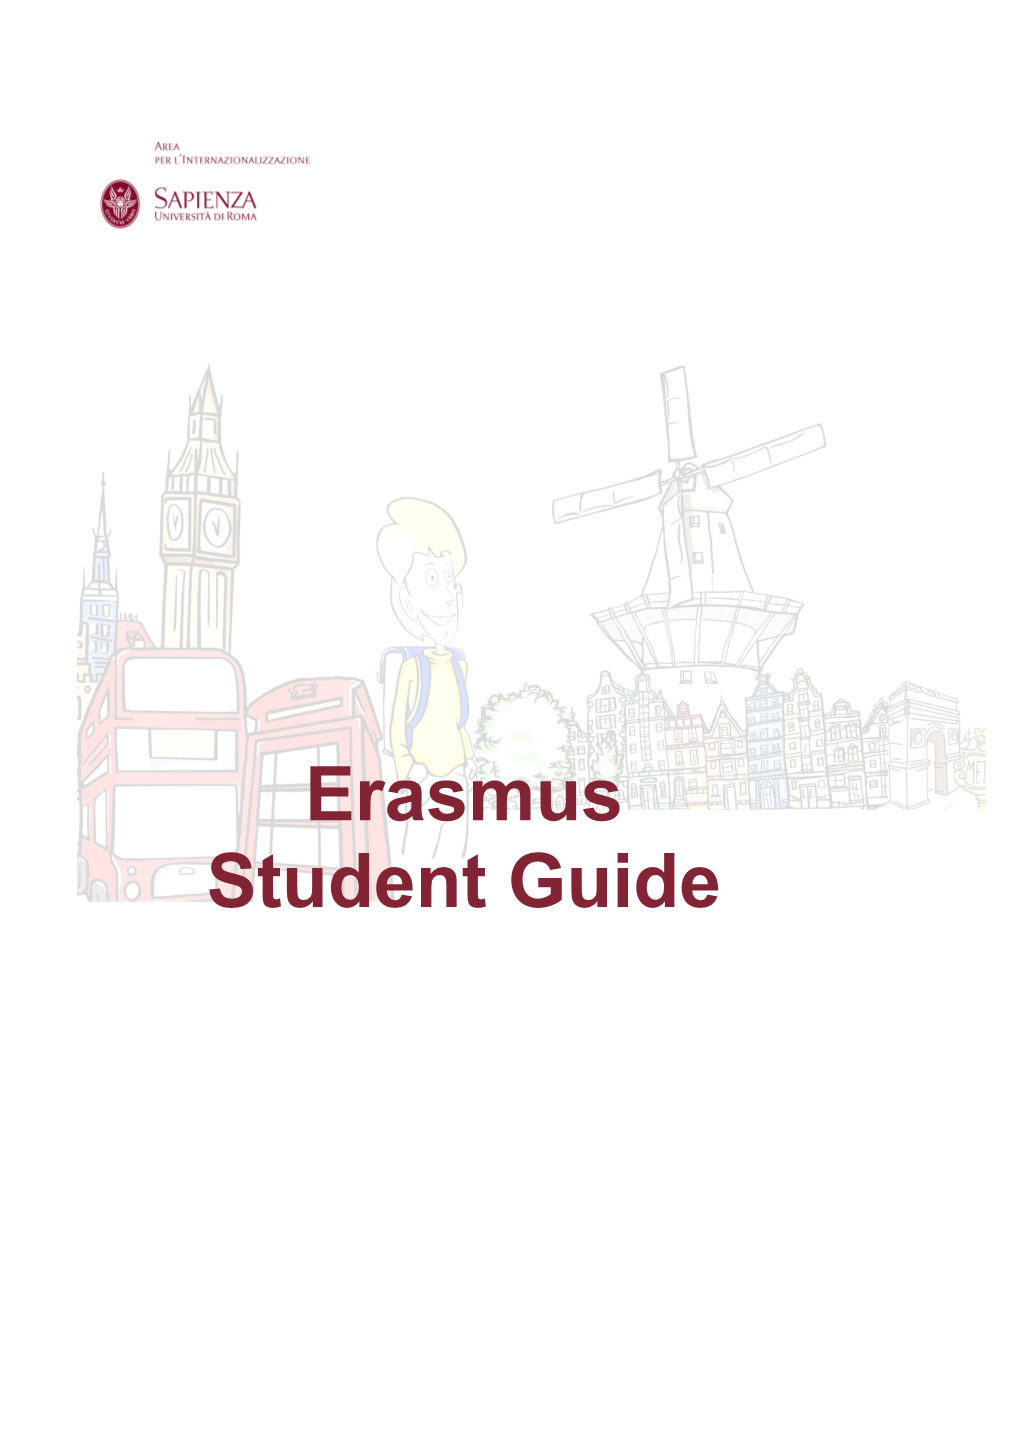 Draft of International Student Guide with Student Services Guide